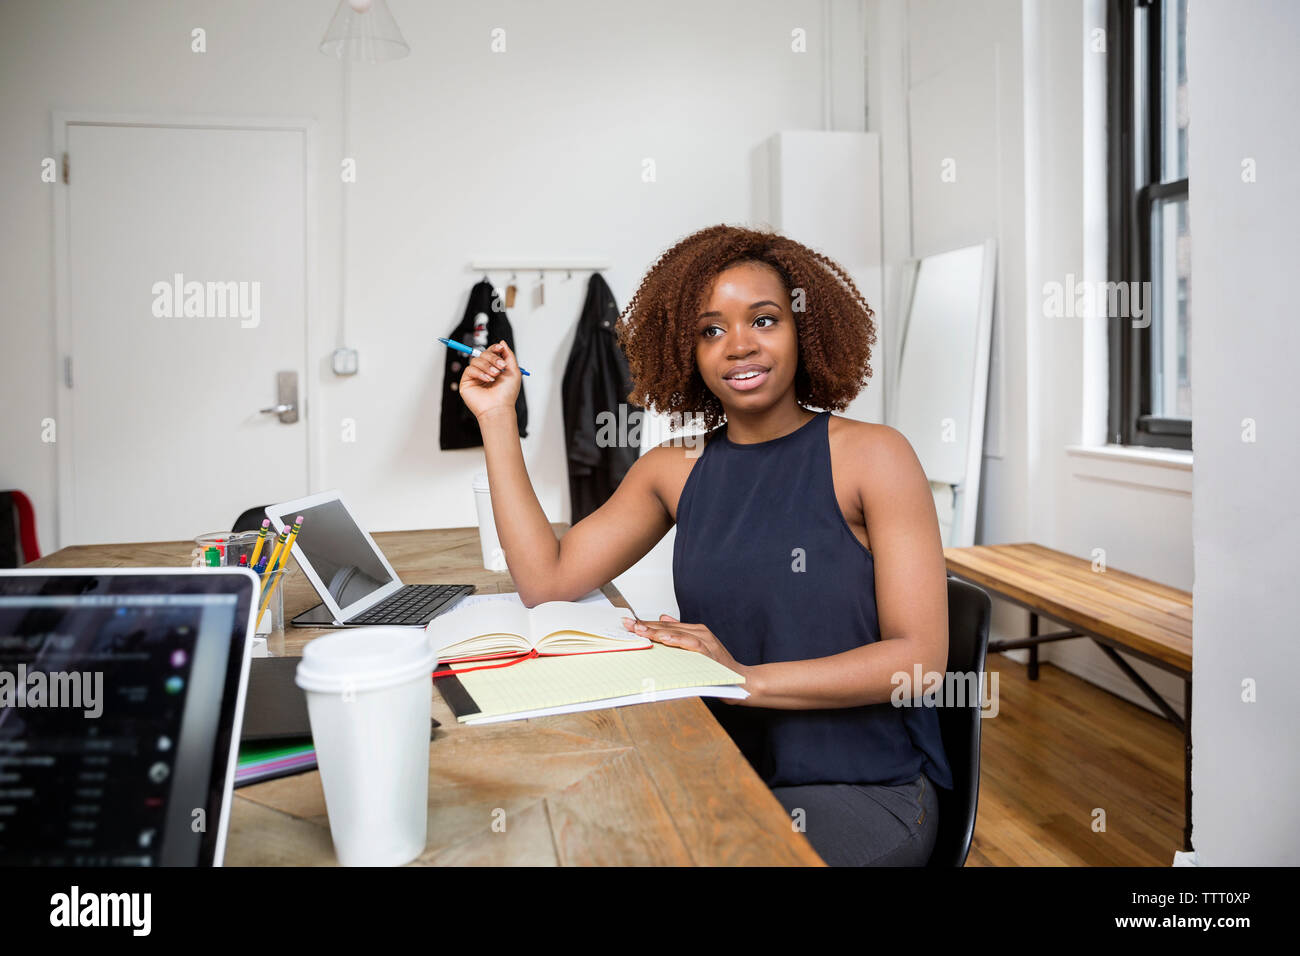 Confident businesswoman looking while sitting at desk in creative office Stock Photo